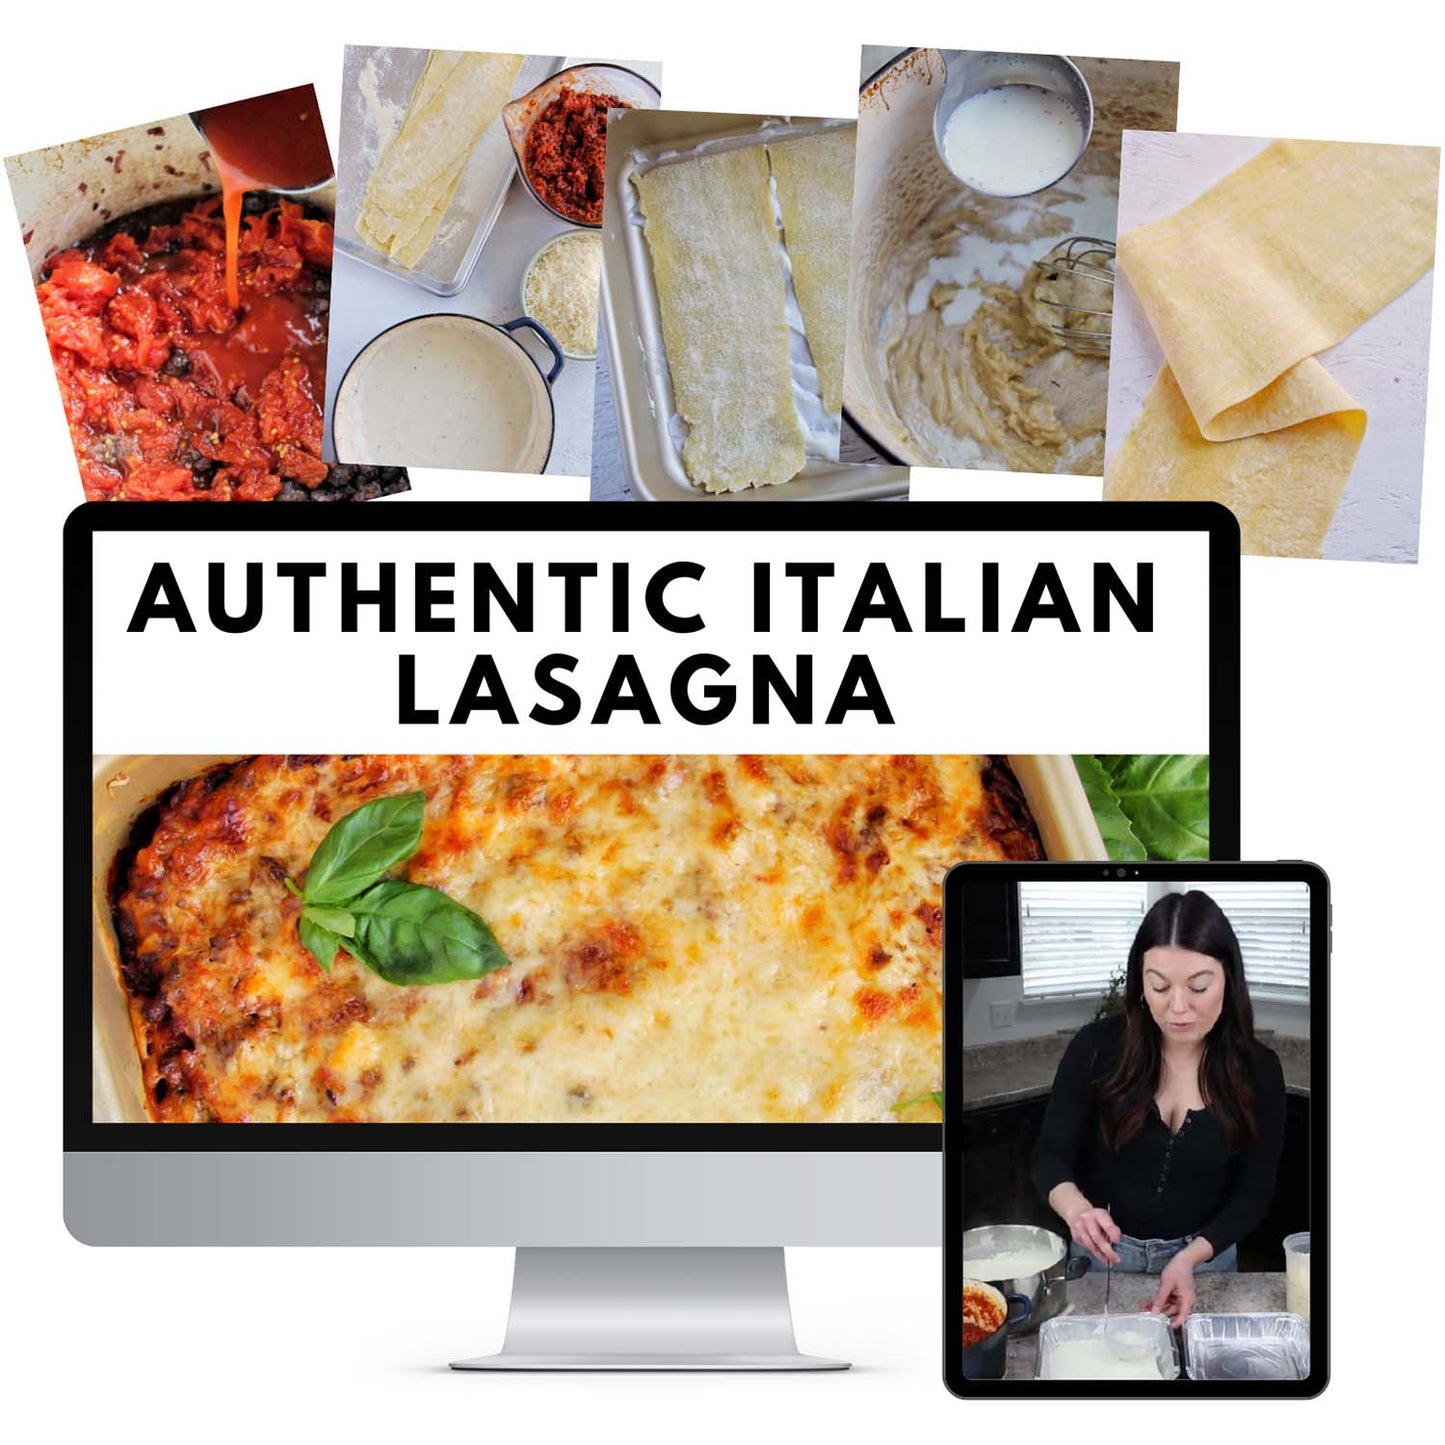 Pictures of lasagna ingredients promoting the Authentic Italian Lasagna course.